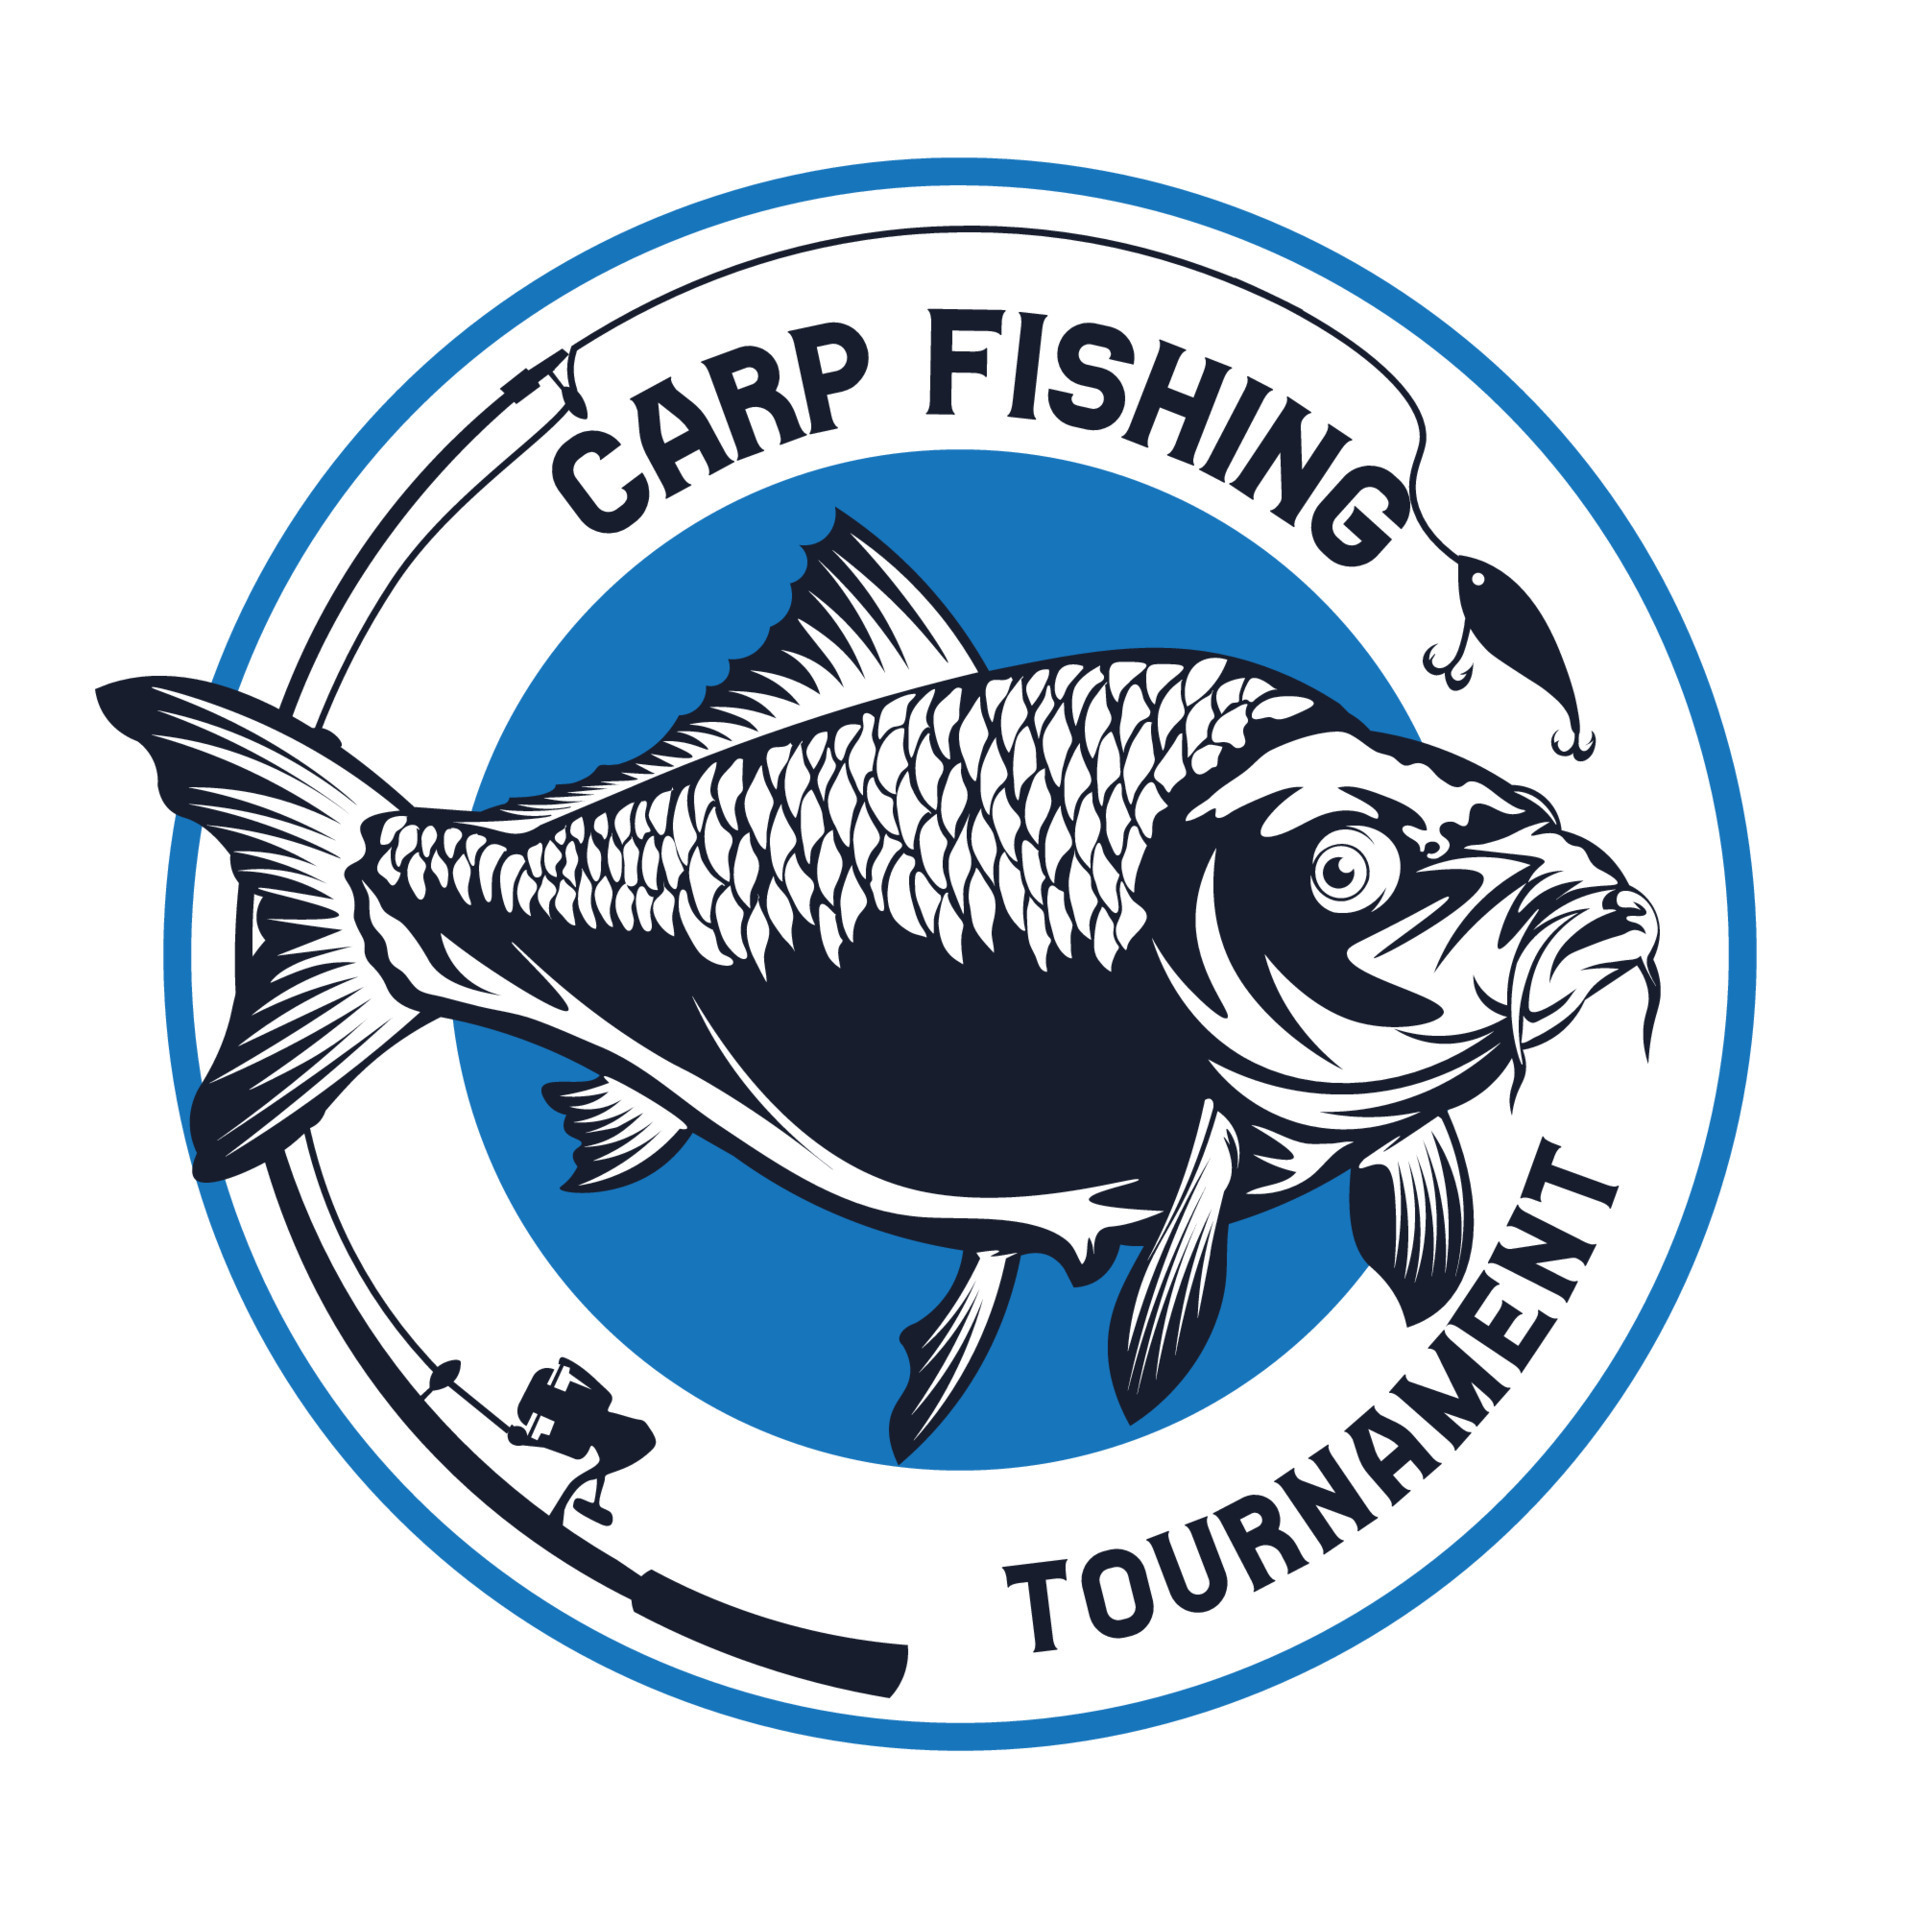 https://static.vecteezy.com/system/resources/previews/014/414/177/original/carp-fishing-logo-good-for-fishing-tournament-event-and-fresh-fish-store-supplier-company-business-logo-design-vector.jpg